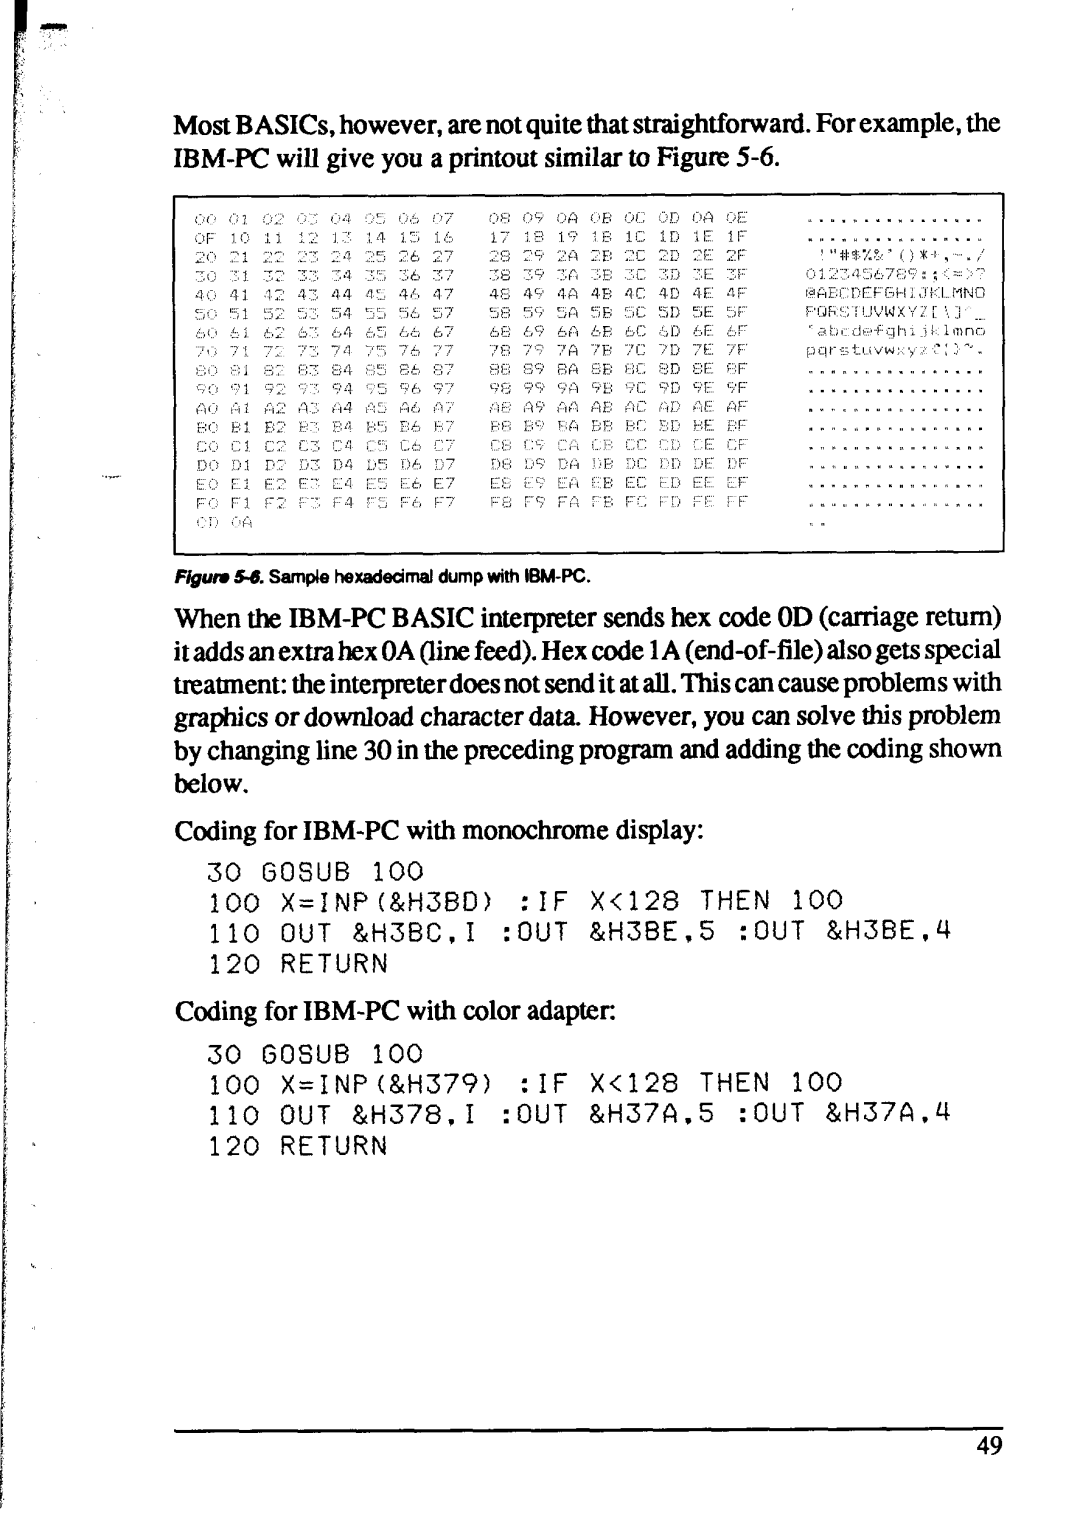 Star Micronics XR-1520, XR-1020 manual Coding for IBM-PC with monochrome display 